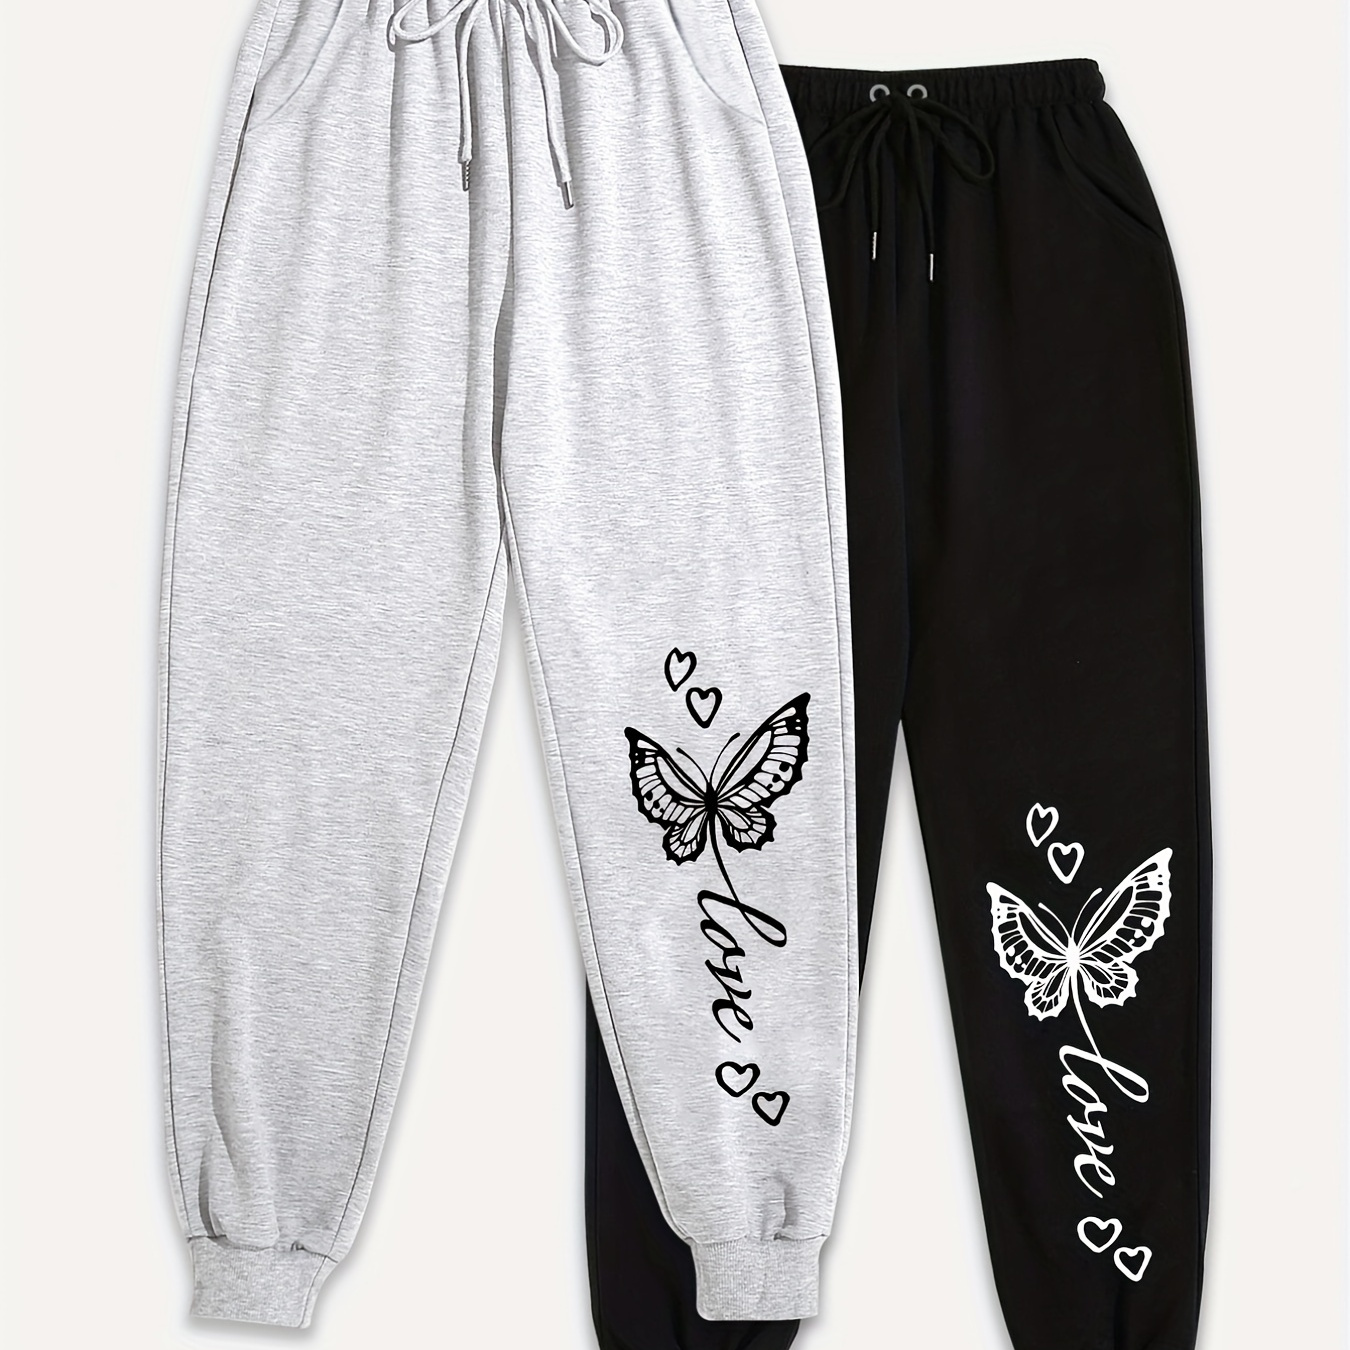 

2 Pieces Butterfly Print Sweatpants, Casual Drawstring Jogger Pants For Spring & Fall, Women's Clothing